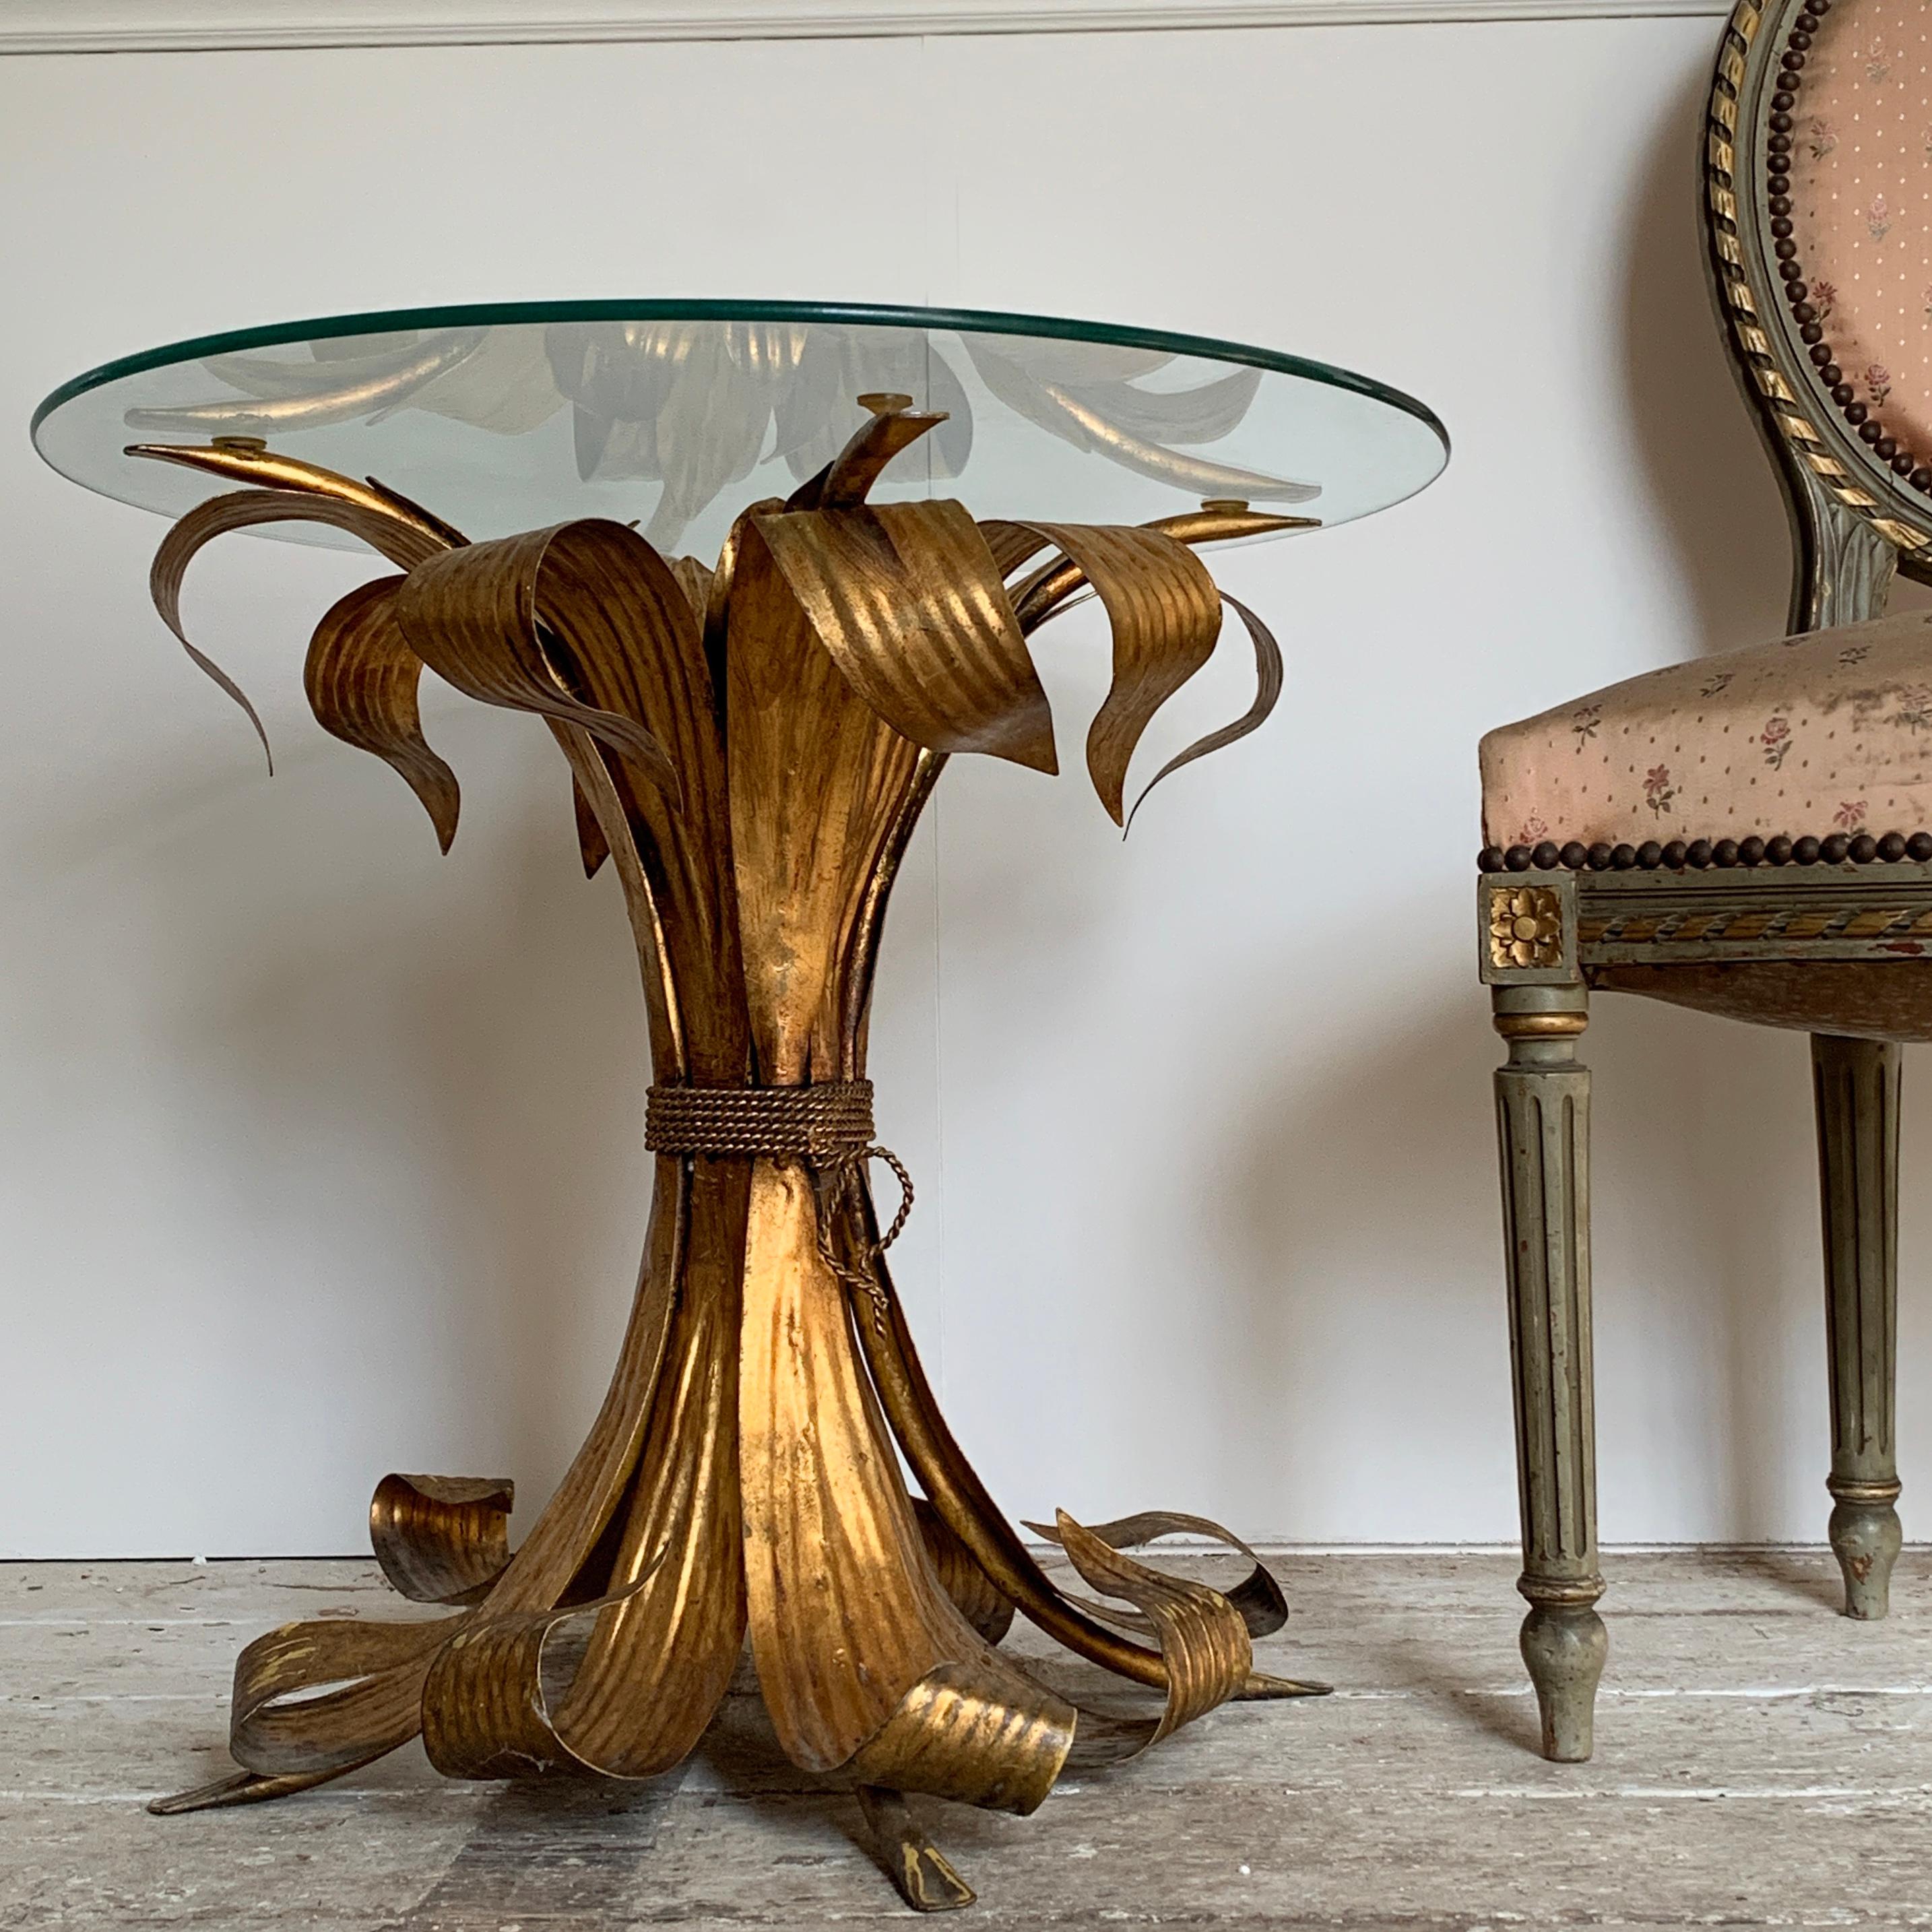 Stunning rare Italian gilt leaf design tole table
The table made from broad sculpted leaves tied at the centre with a metal twisted cord effect detail, the table base is full and thick in size and a real statement piece
circa 1950s-1960s
Beautiful